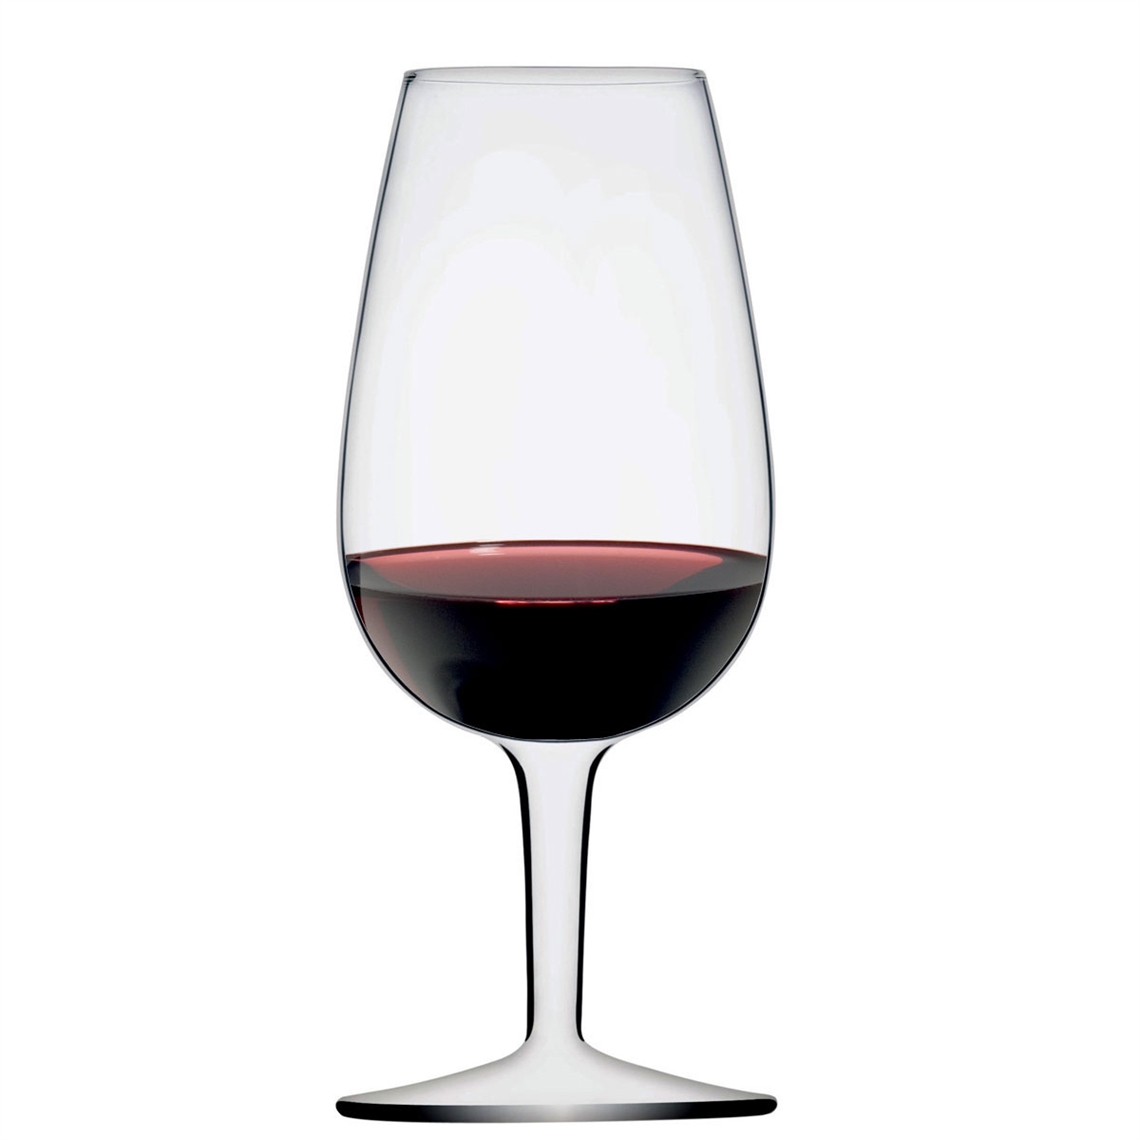 View more large wine glasses from our Wine Tasting Glasses range